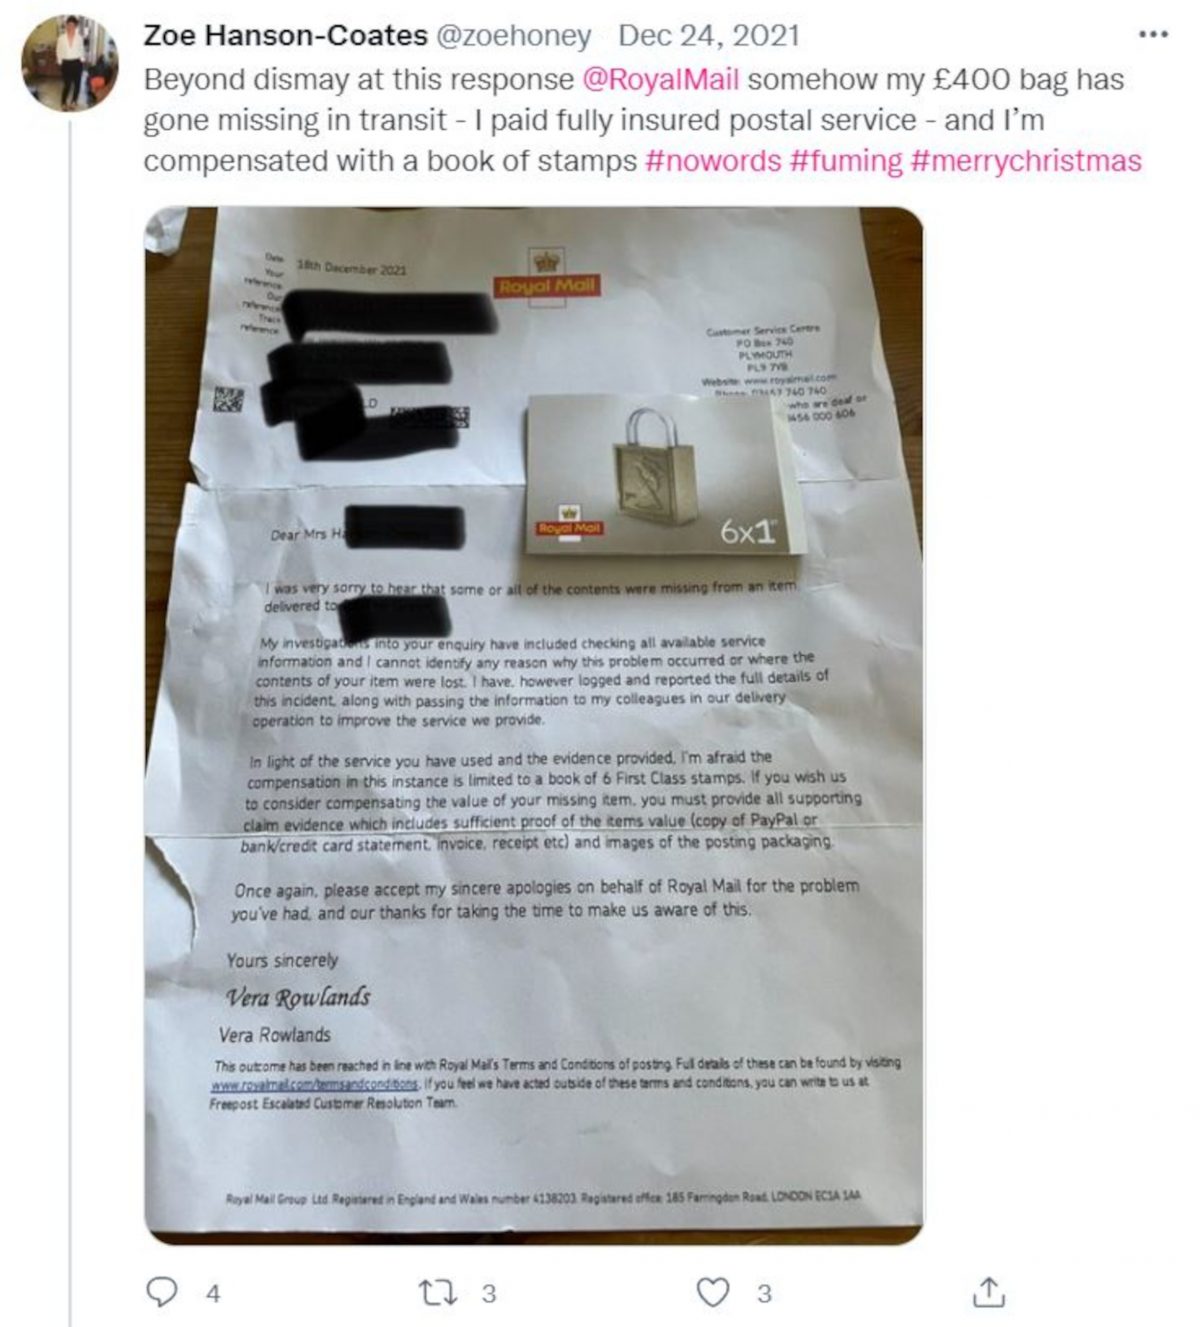 A customer of Royal Mail tweeted their dissatisfaction